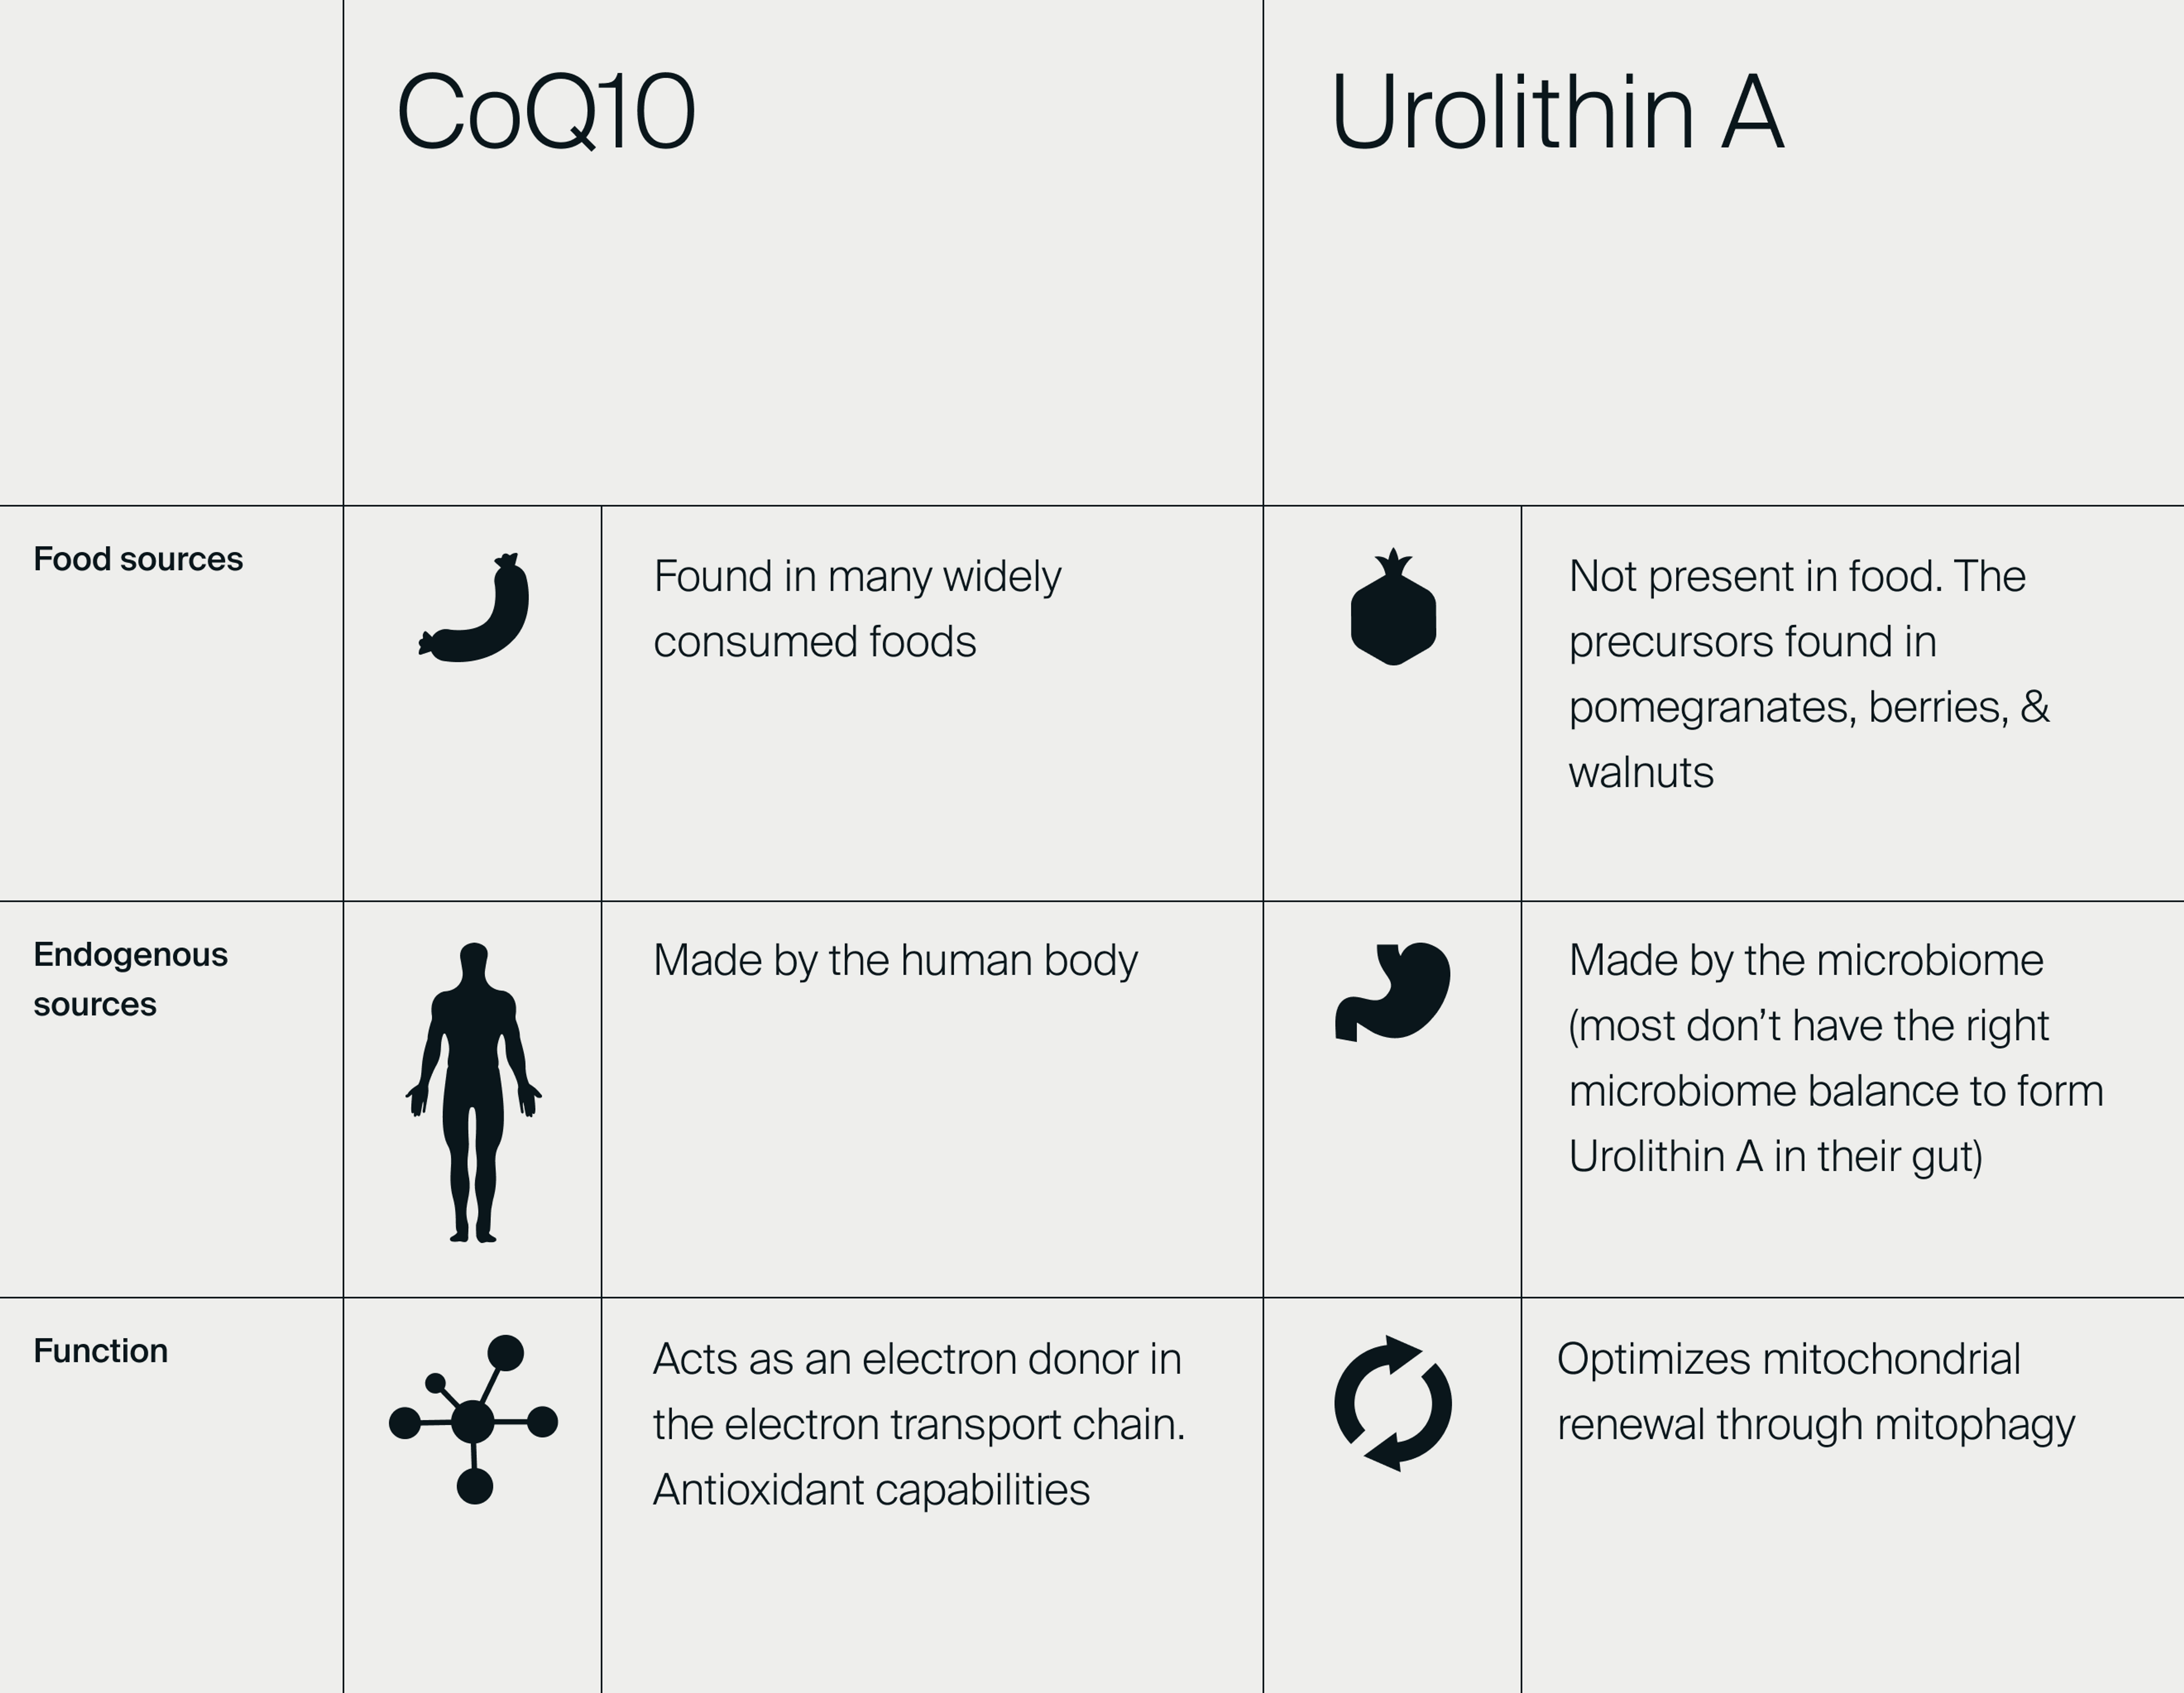 Table comparing the endogenous sources, food sources and the function of Urolithin A and CoQ10